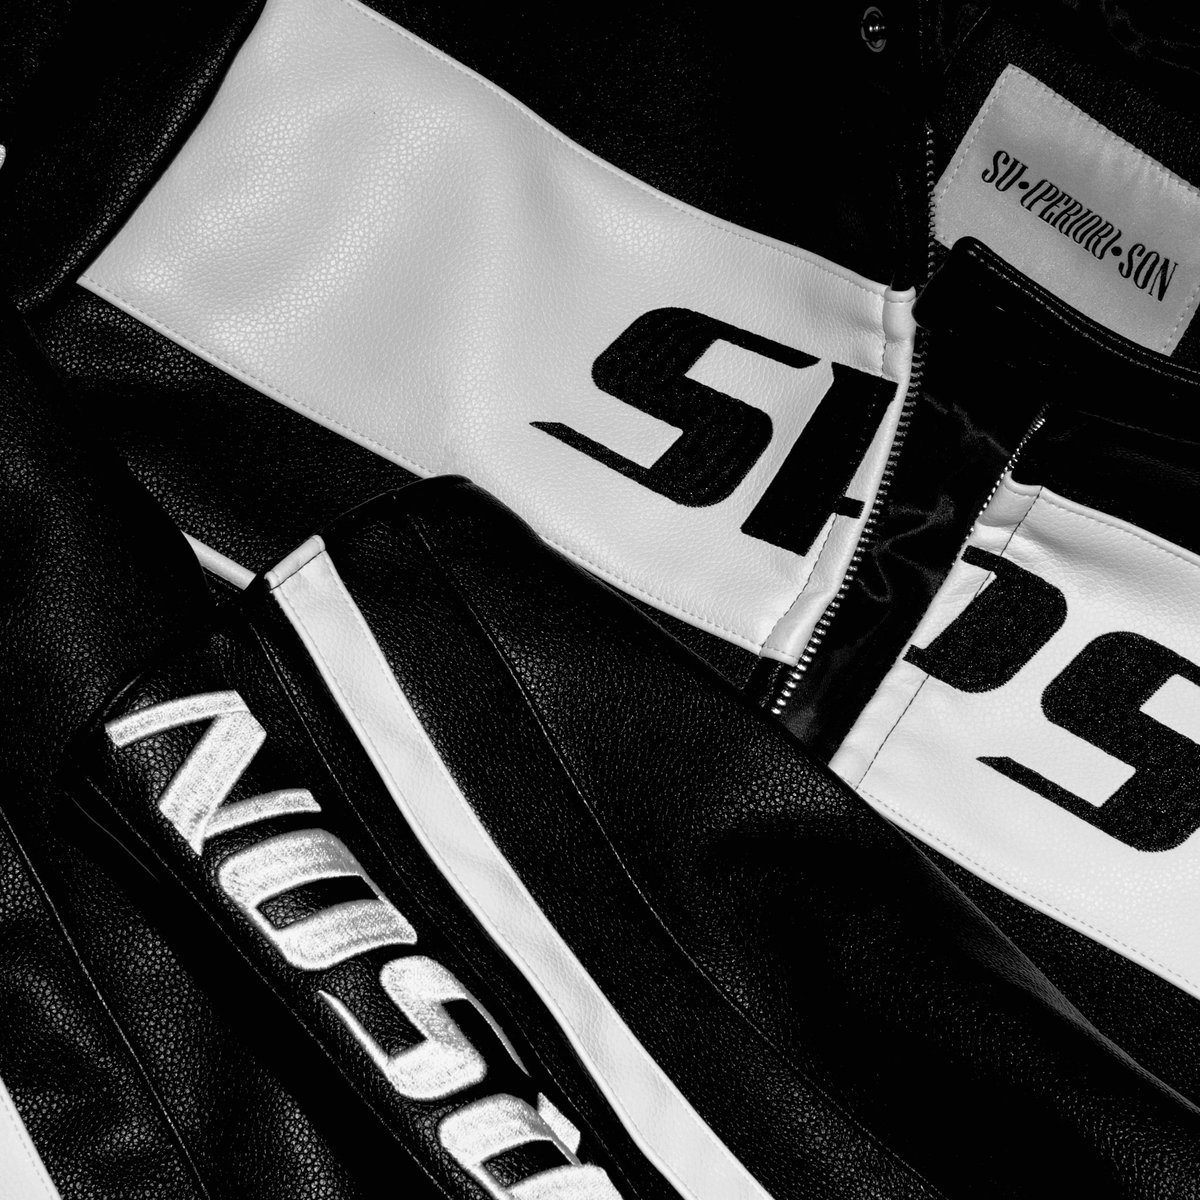 LEATHER you like it or not. 💣 SPS ‘Rider’ Leather Jacket is here! 🏍️ Pre-order date: April 20, 2024 - 7:00pm superiorson.com @felipsuperior